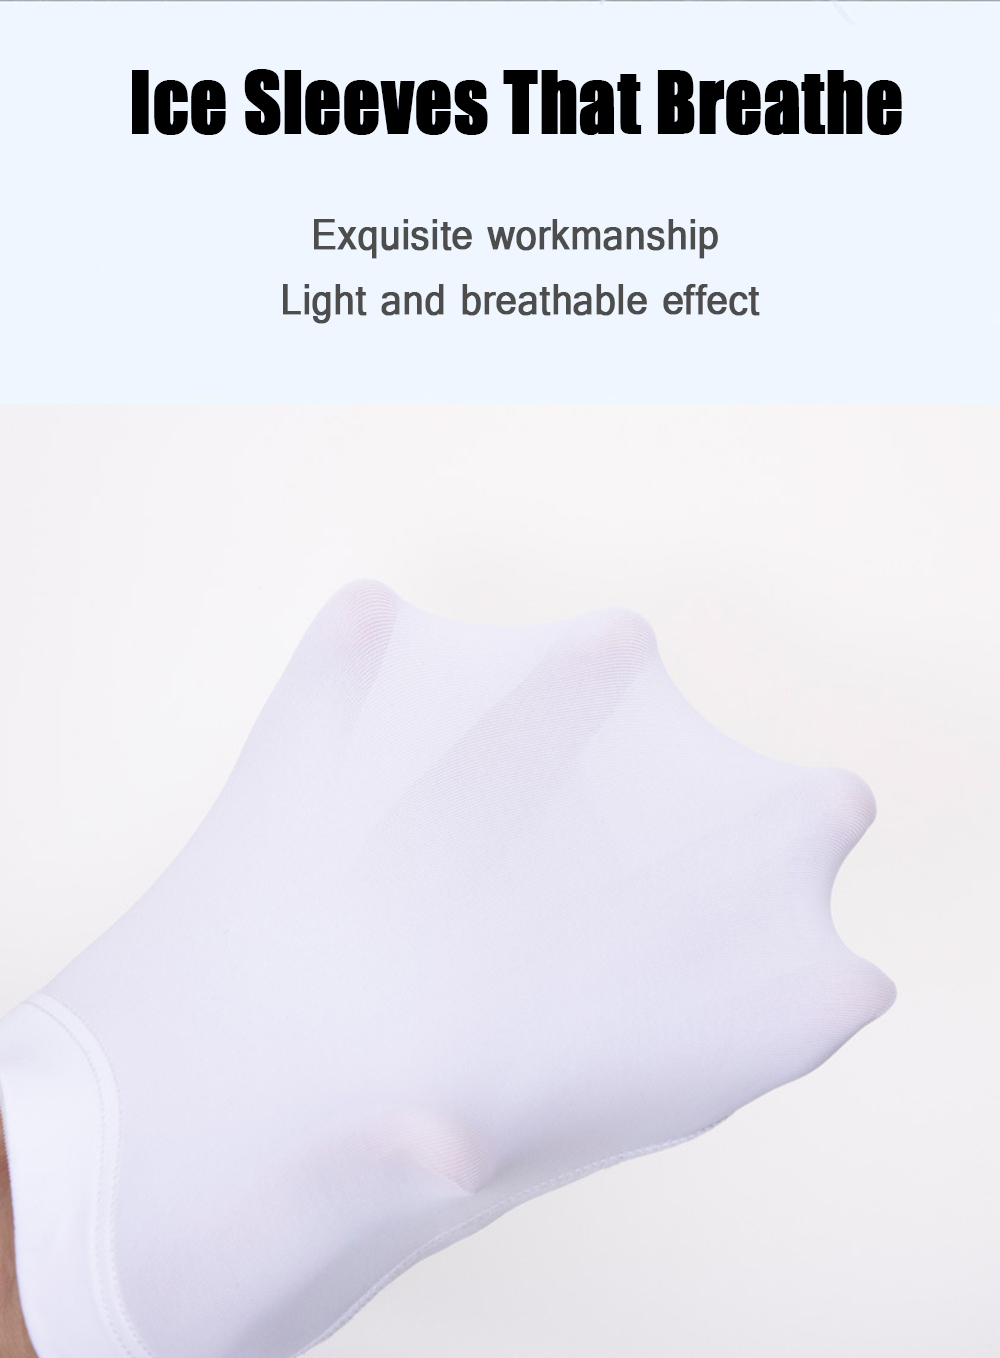 ZANLURE-UPF50-Summer-Ice-Sleeve-Breathable-Sun-Protection-UV-protection-Cool-Refreshing-Lightweight--1842126-2